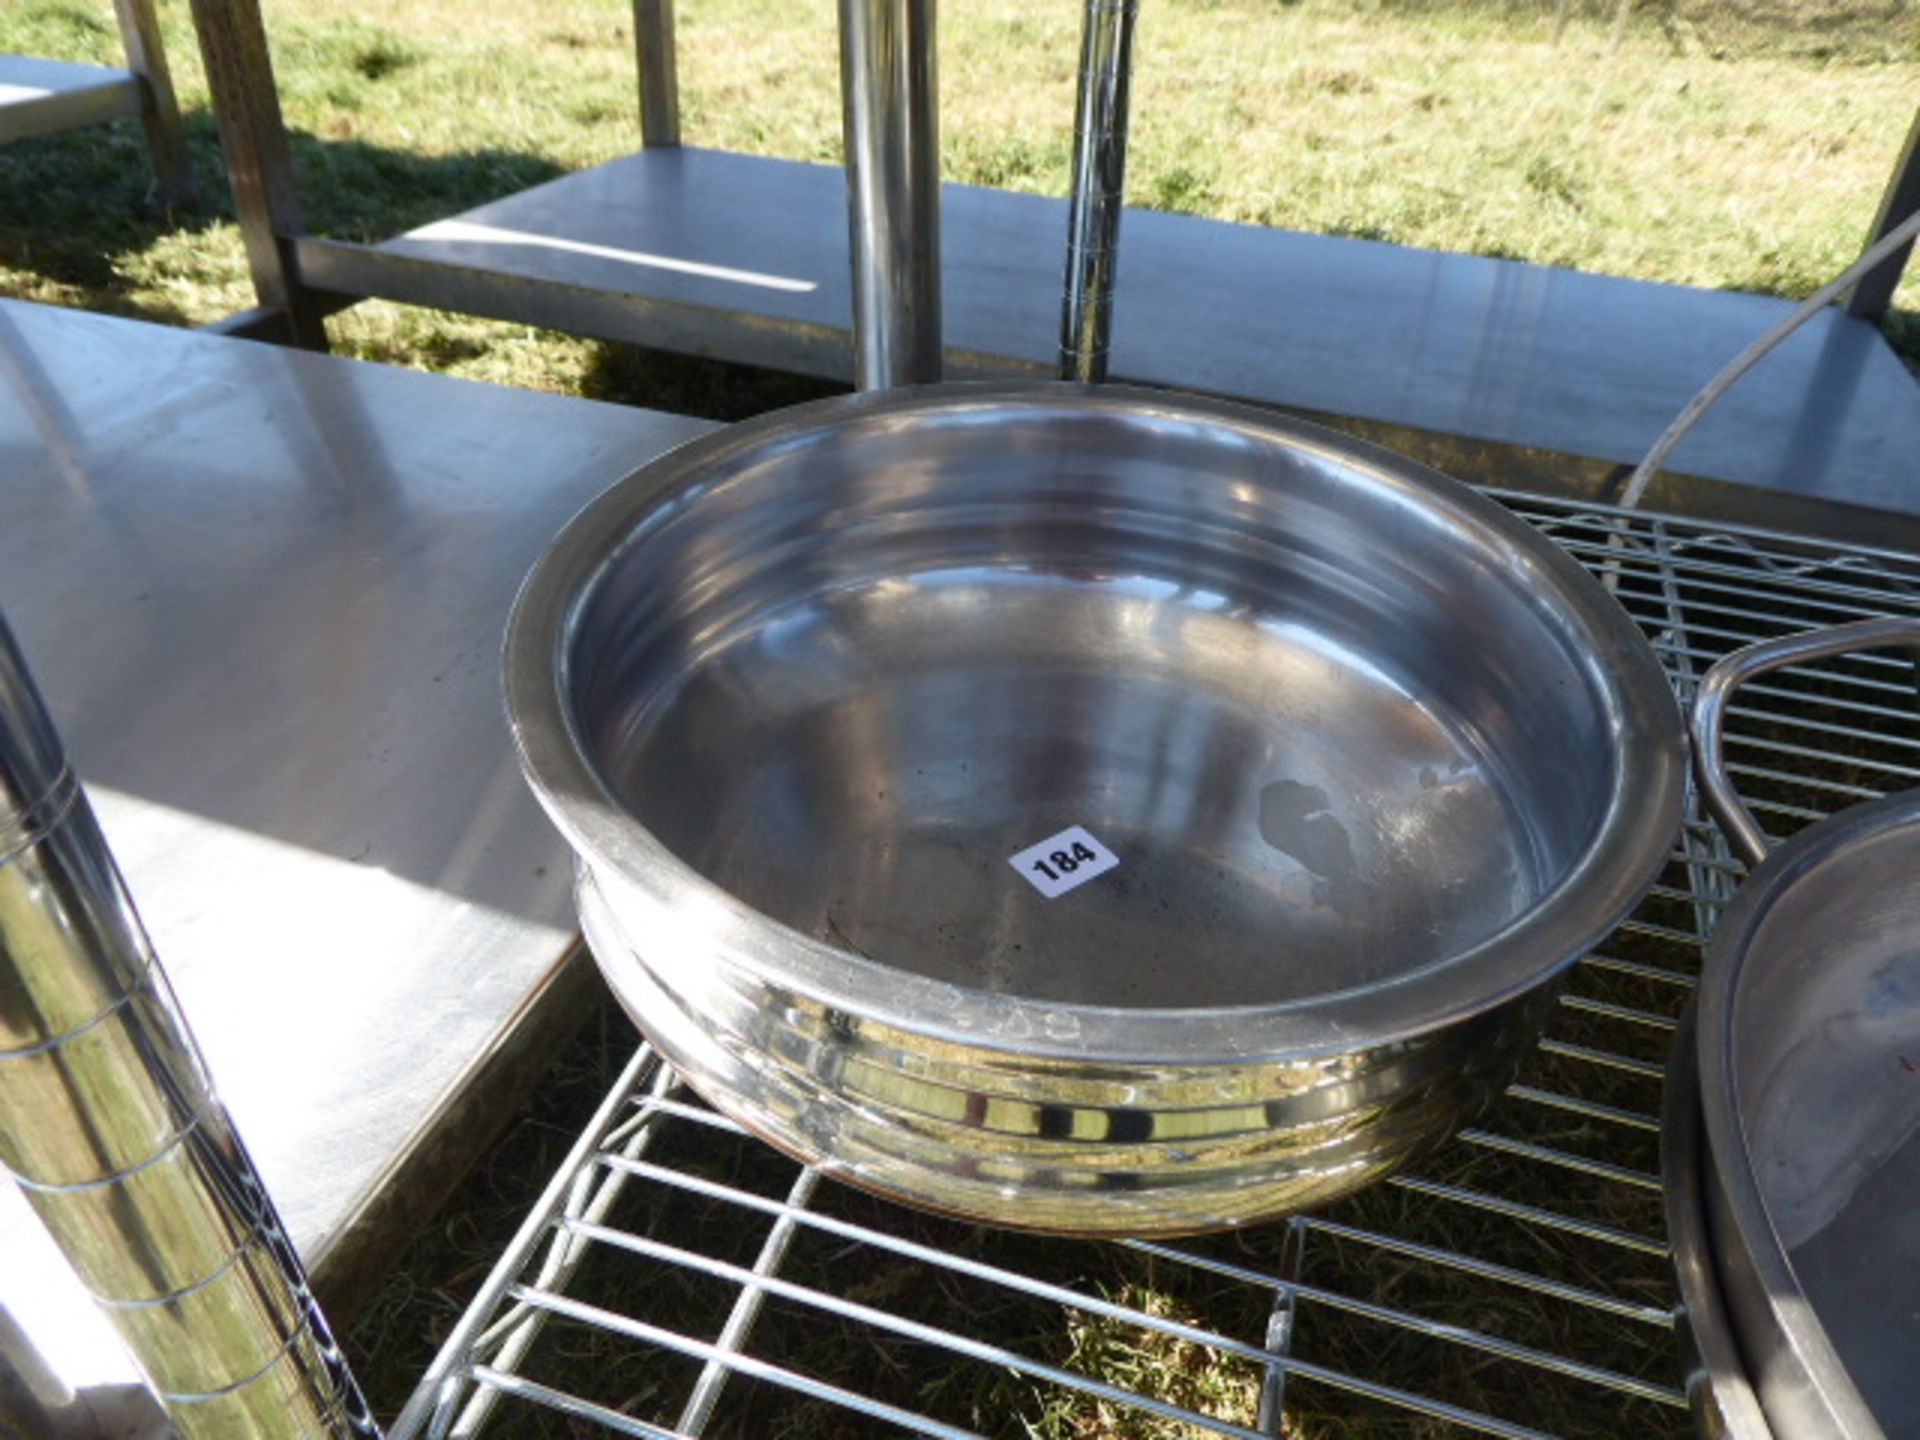 32 cm copper bottomed and stainless steel serving dish